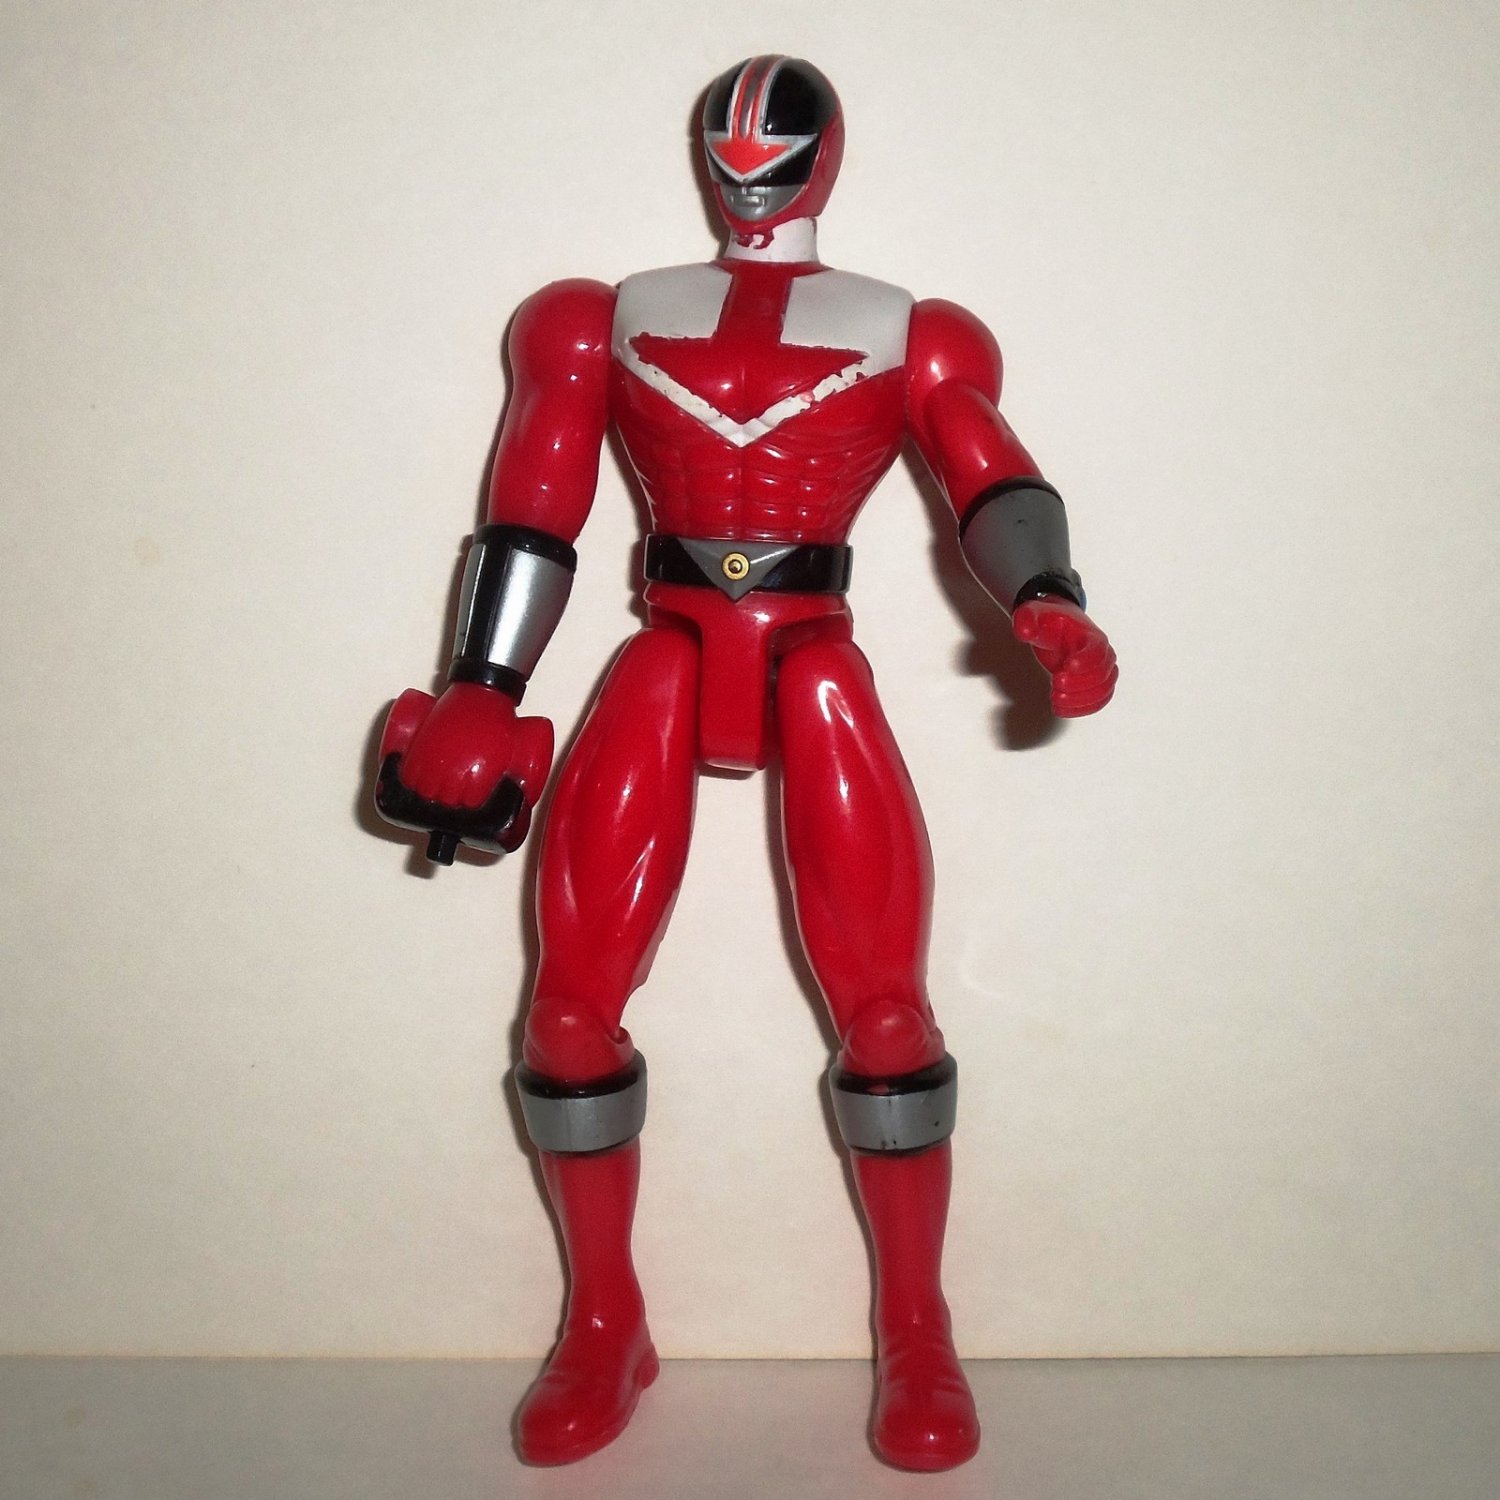 RARE 2001 POWER RANGERS TIME FORCE RED TF FIGHTER POWER RANGER